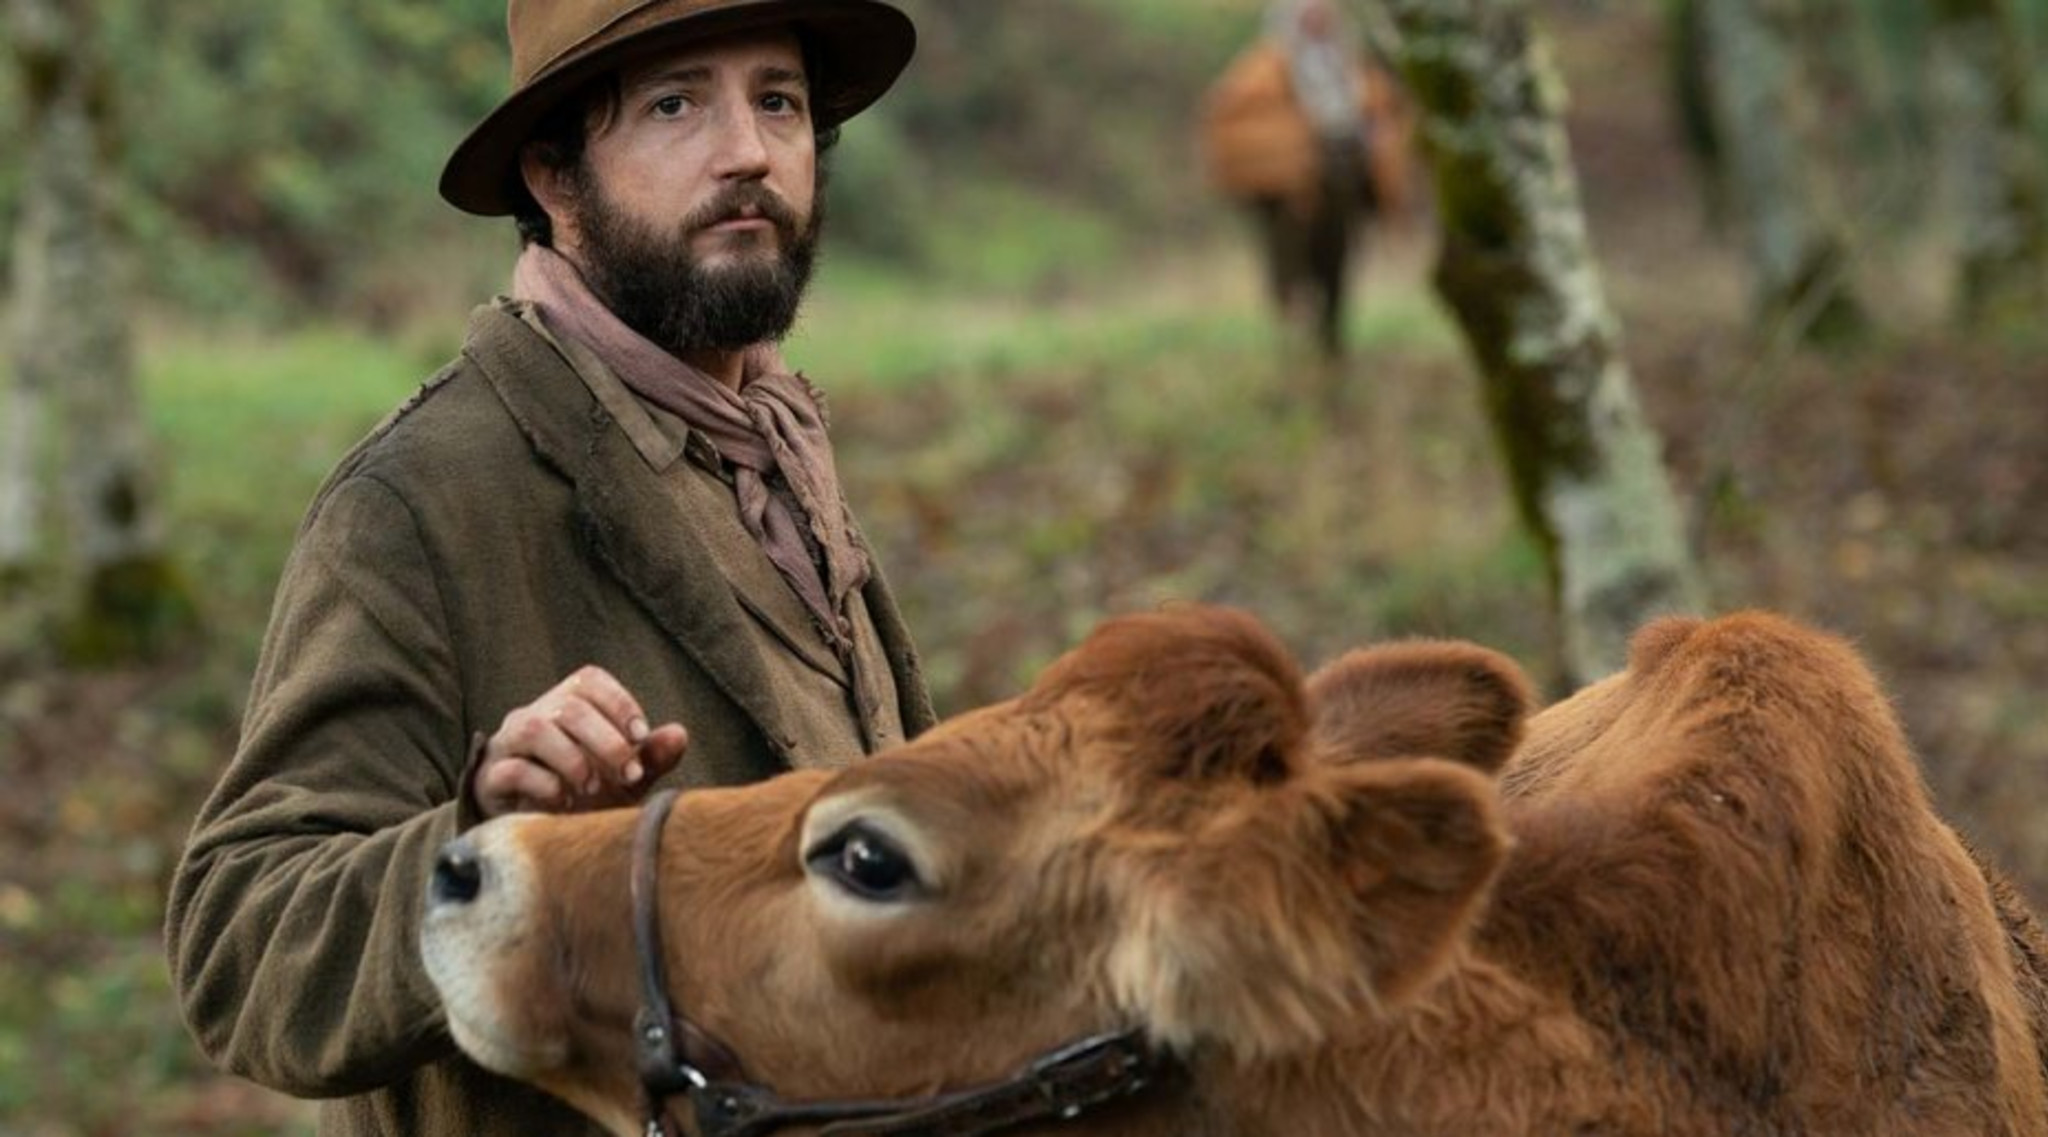 Director Kelly Reichardt on Crafting the Sounds of Silence in 'First Cow'